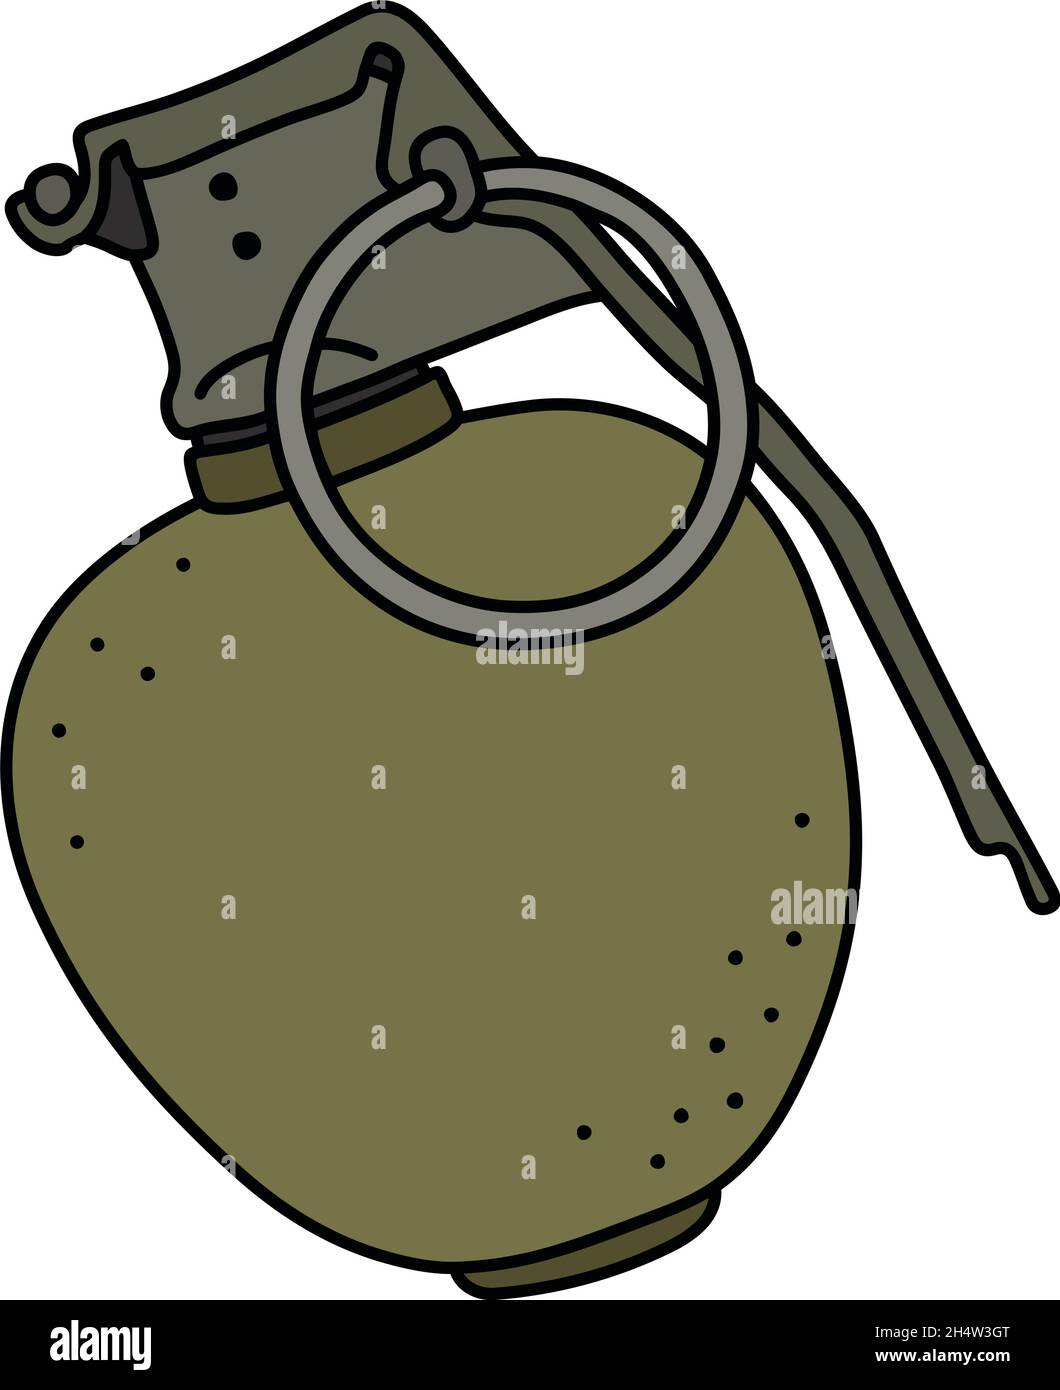 The vectorized hand drawing of an old khaki offensive hand grenade Stock Vector